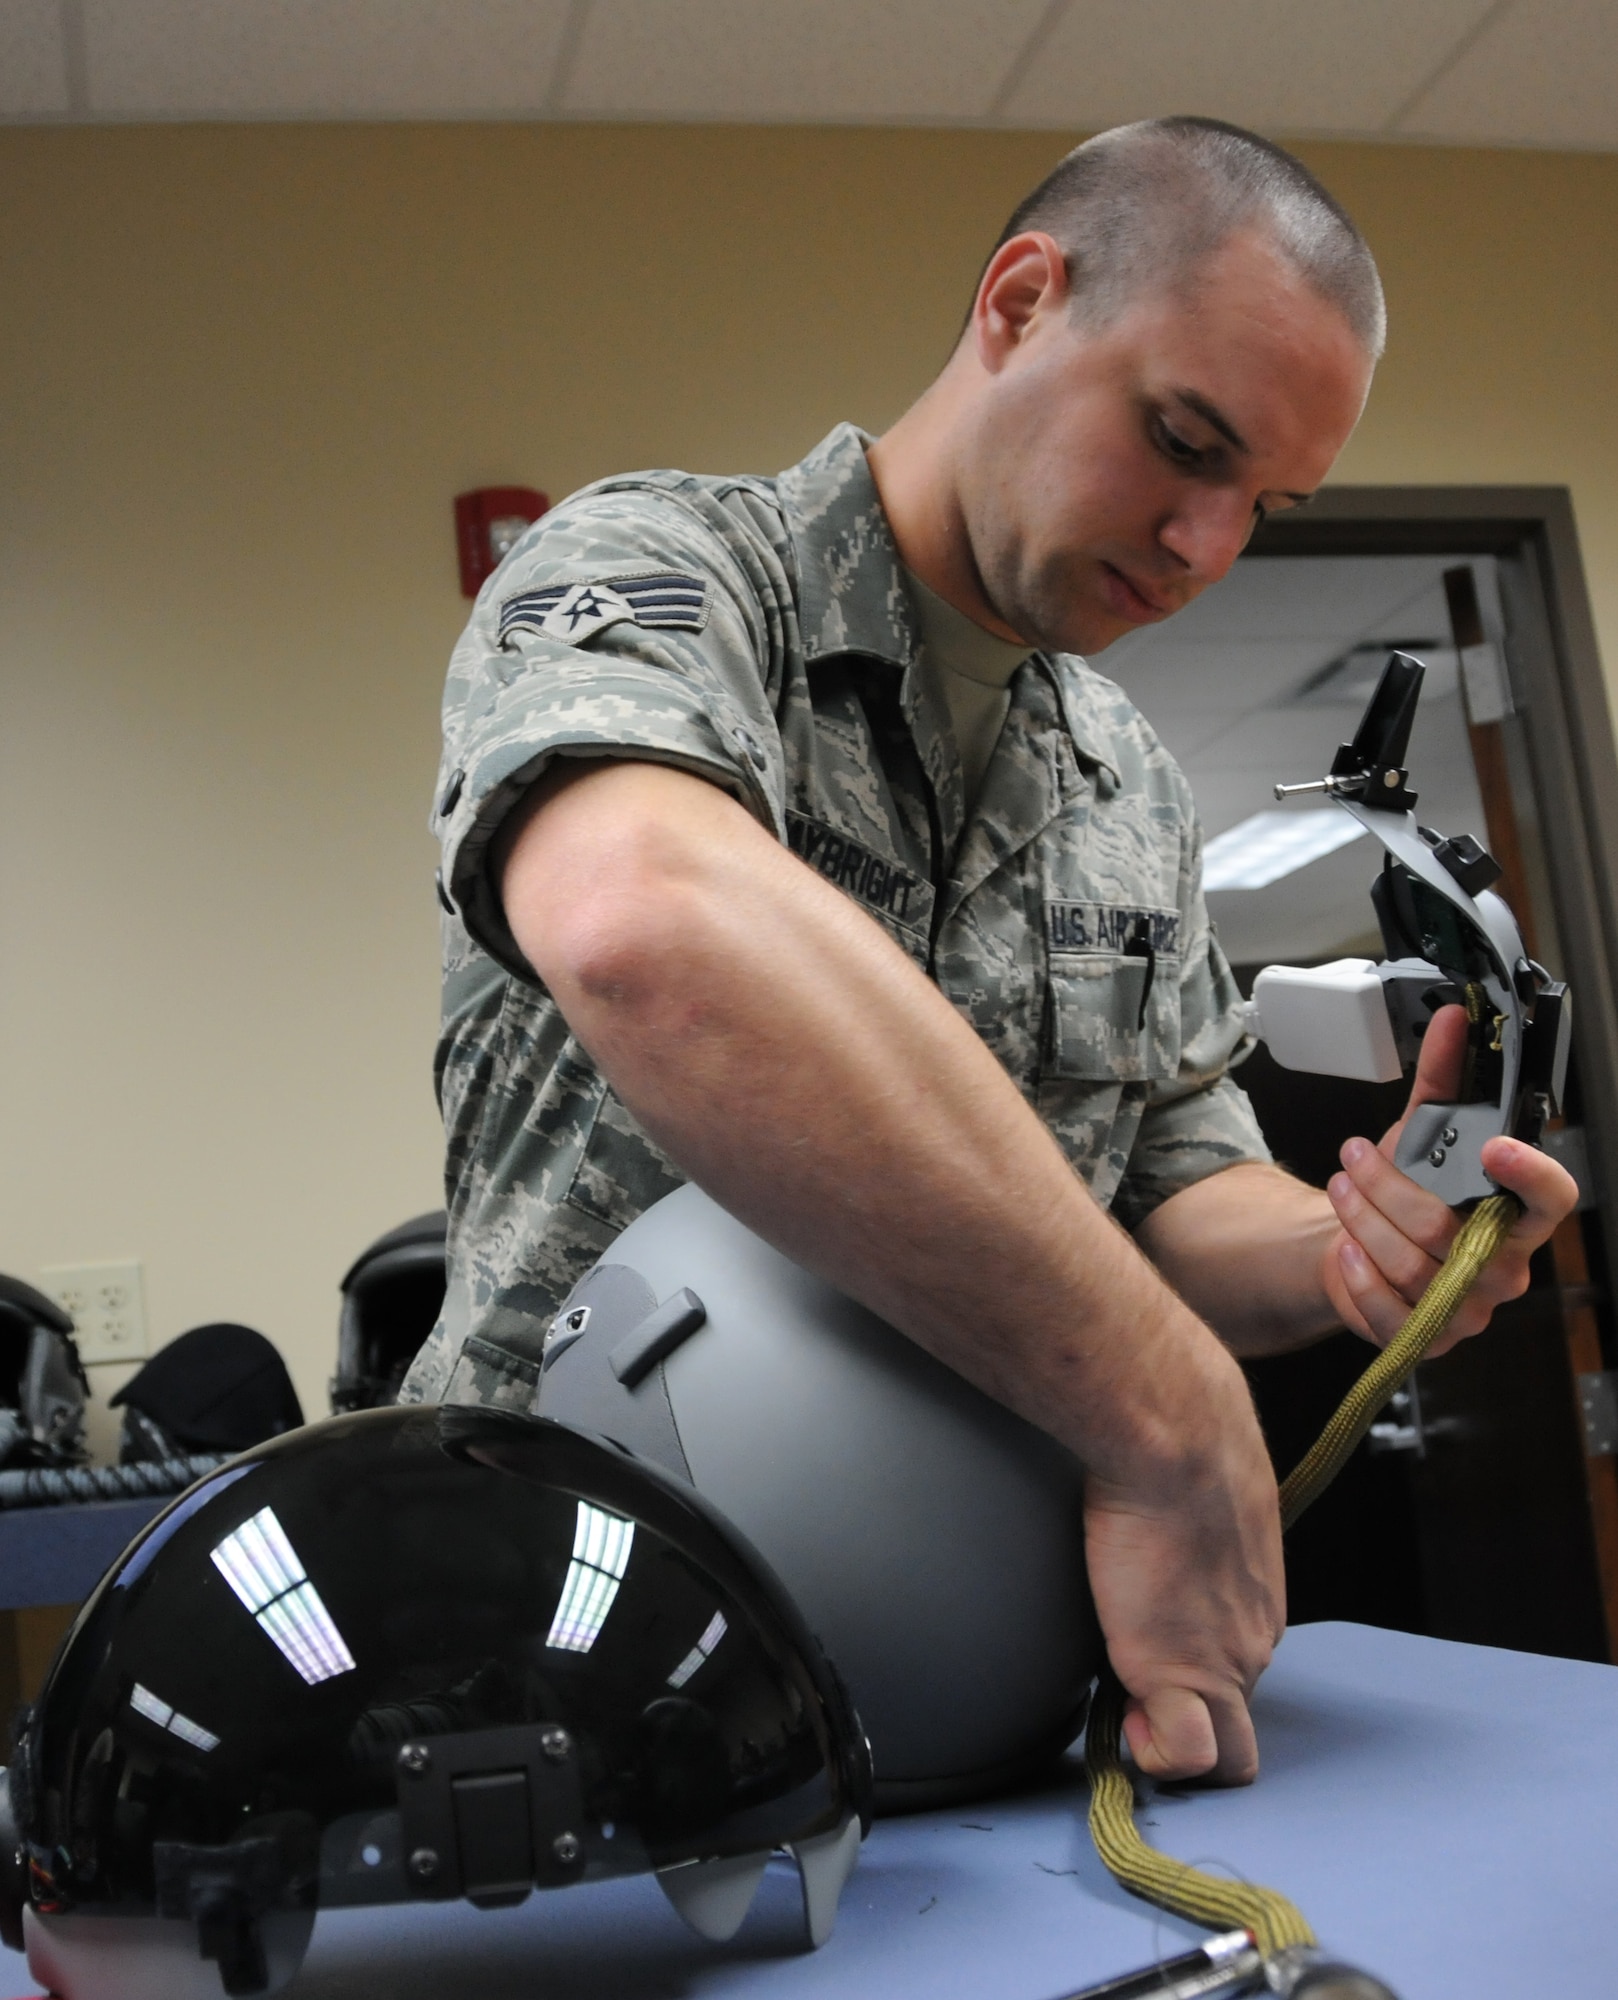 Senior Airman Robert Waybright, 482nd Operations Support Squadron life support, assembles the Helmet Mounted Integrated Targeting unit on a pilot’s helmet at Homestead Air Reserve Base, Fla., July 17. HMIT, currently being fielded at Homestead ARB, is an avionics system that gives the pilot the ability to cue a weapon against a target simply by looking at it anywhere in the cockpit. (U.S. Air Force photo/Ross Tweten)